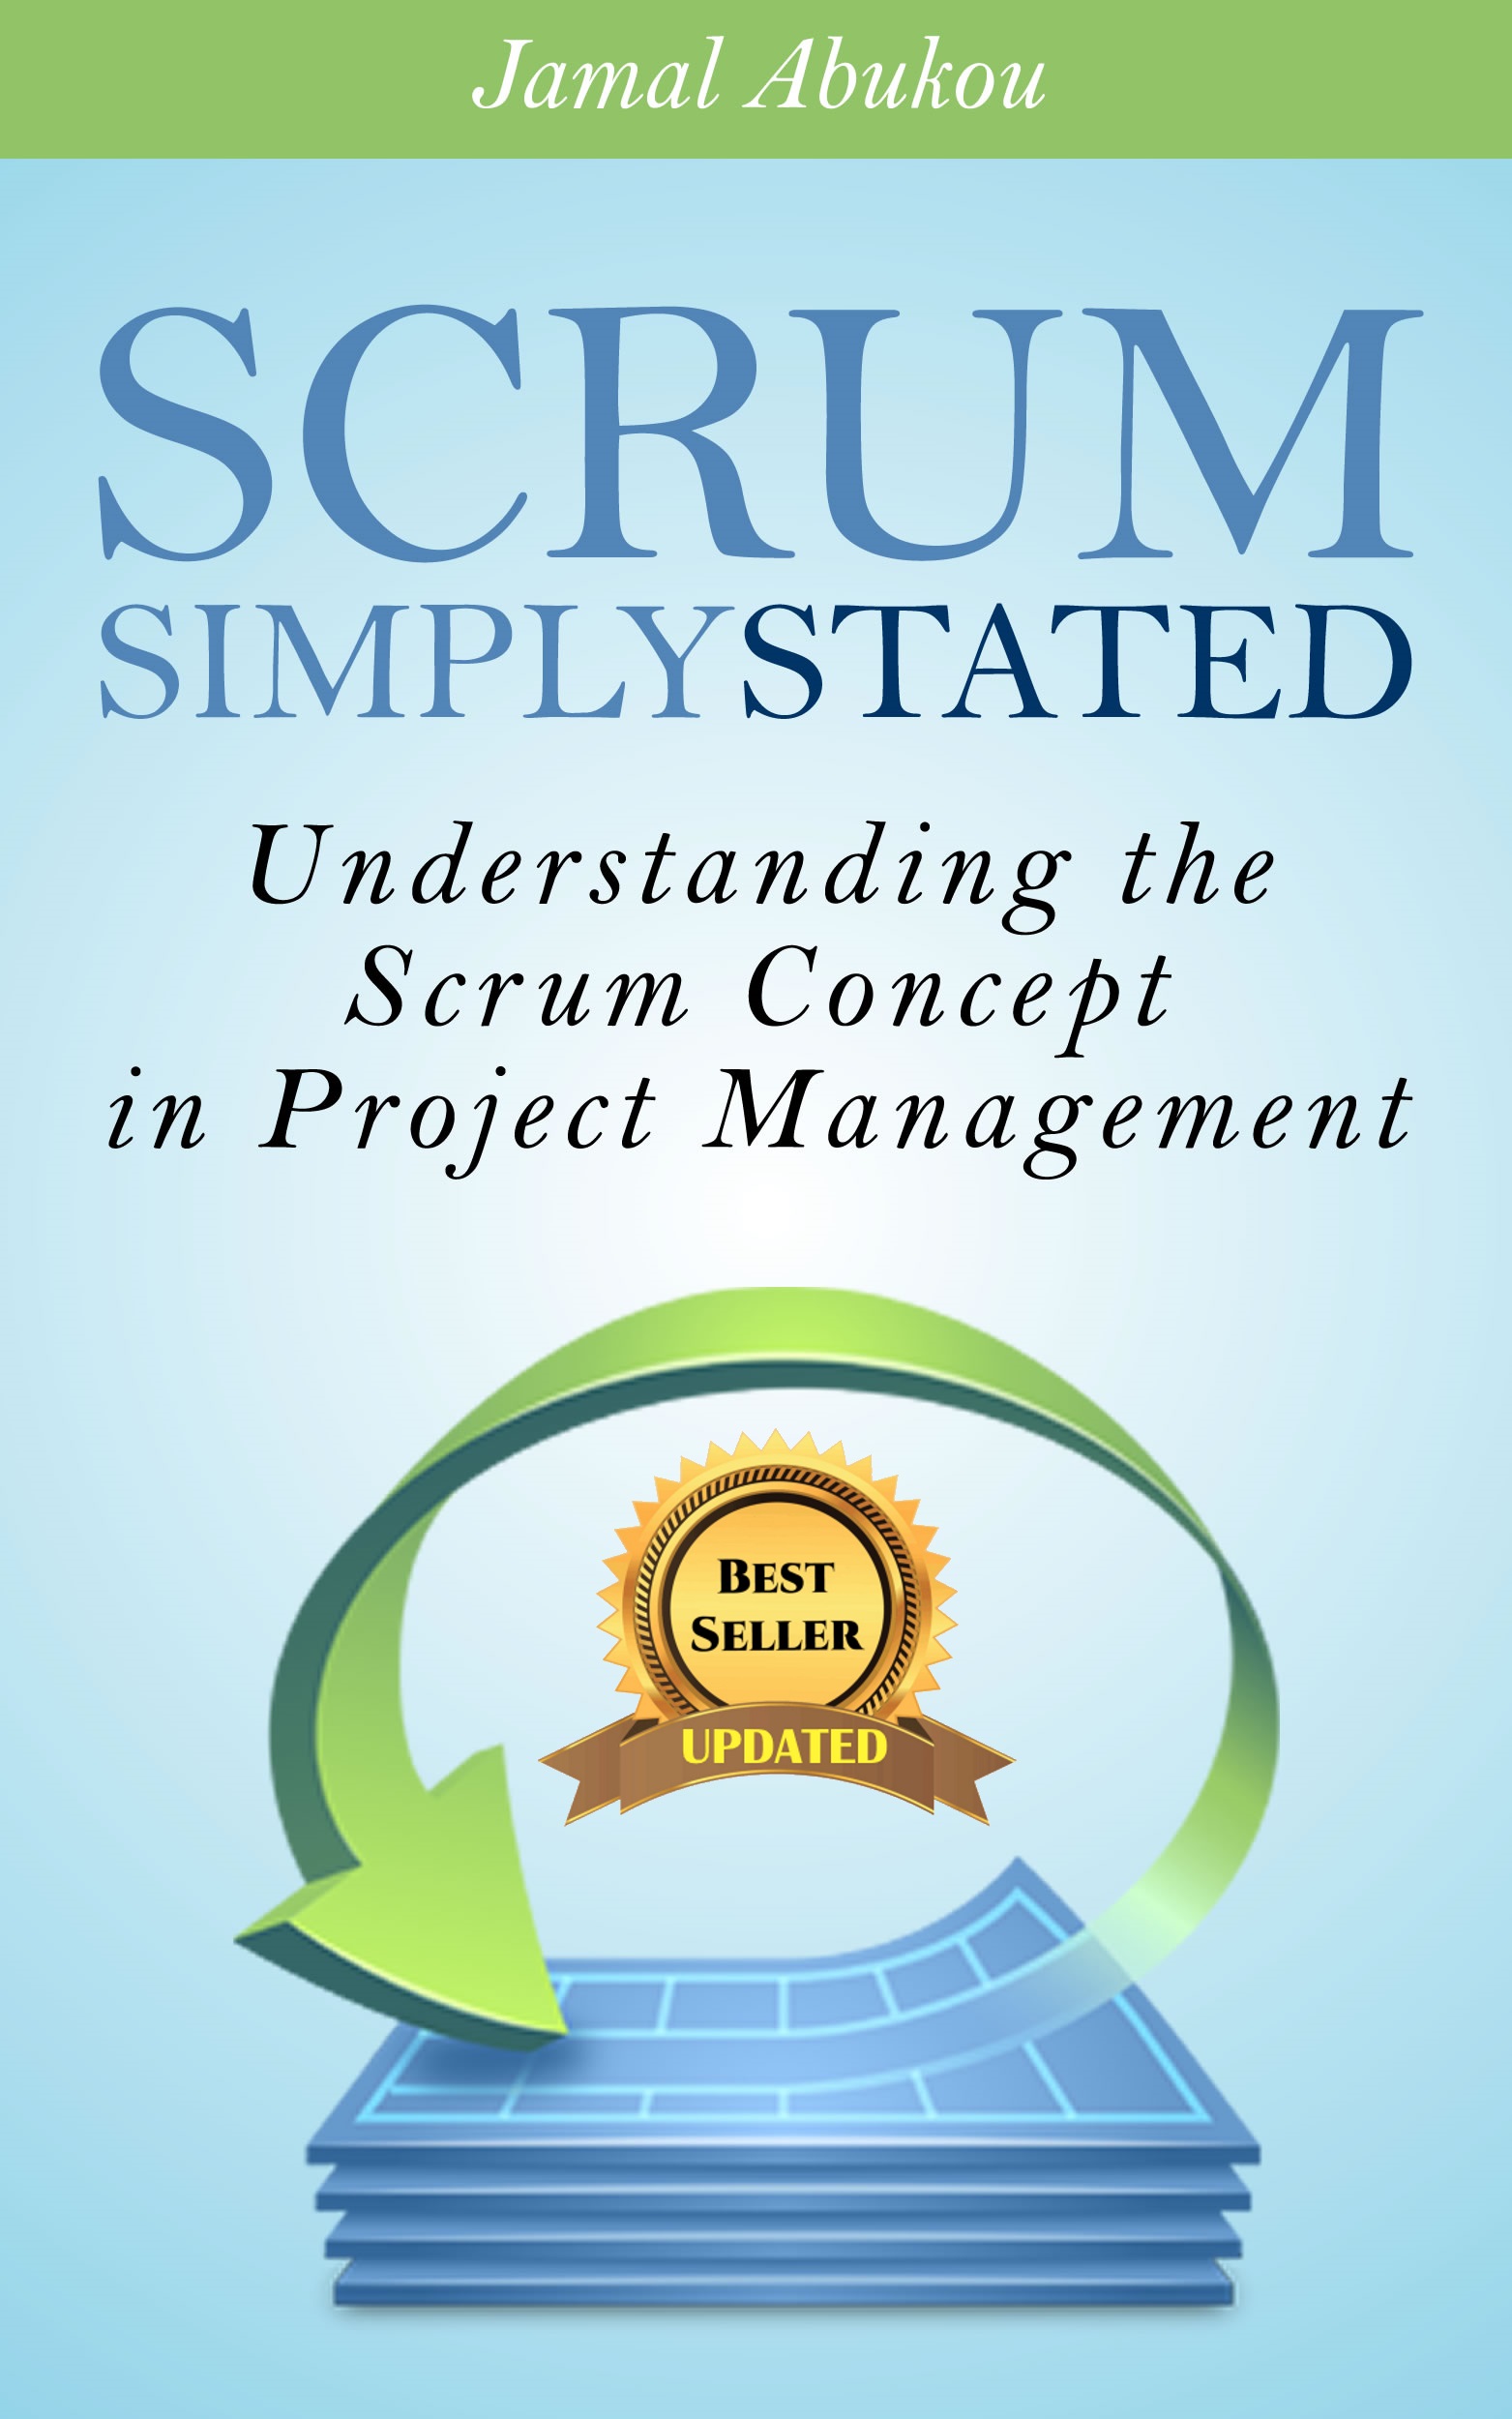 FREE: SCRUM: Simply Stated. Understanding the Scrum Fundamentals by Jamal Abukou